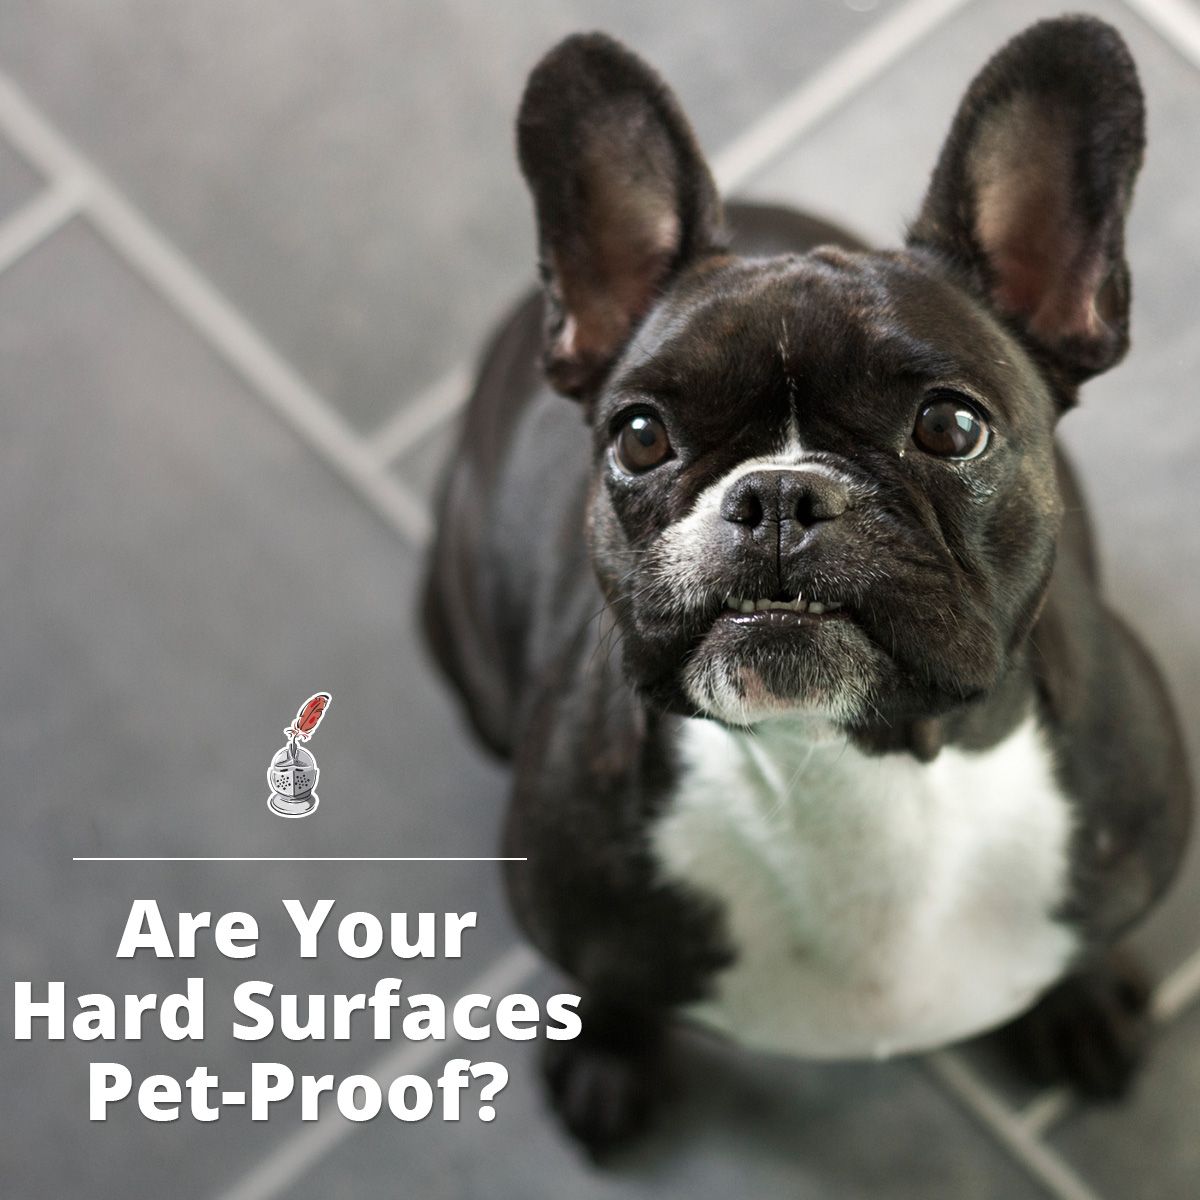 Are Your Hard Surfaces Pet-Proof?